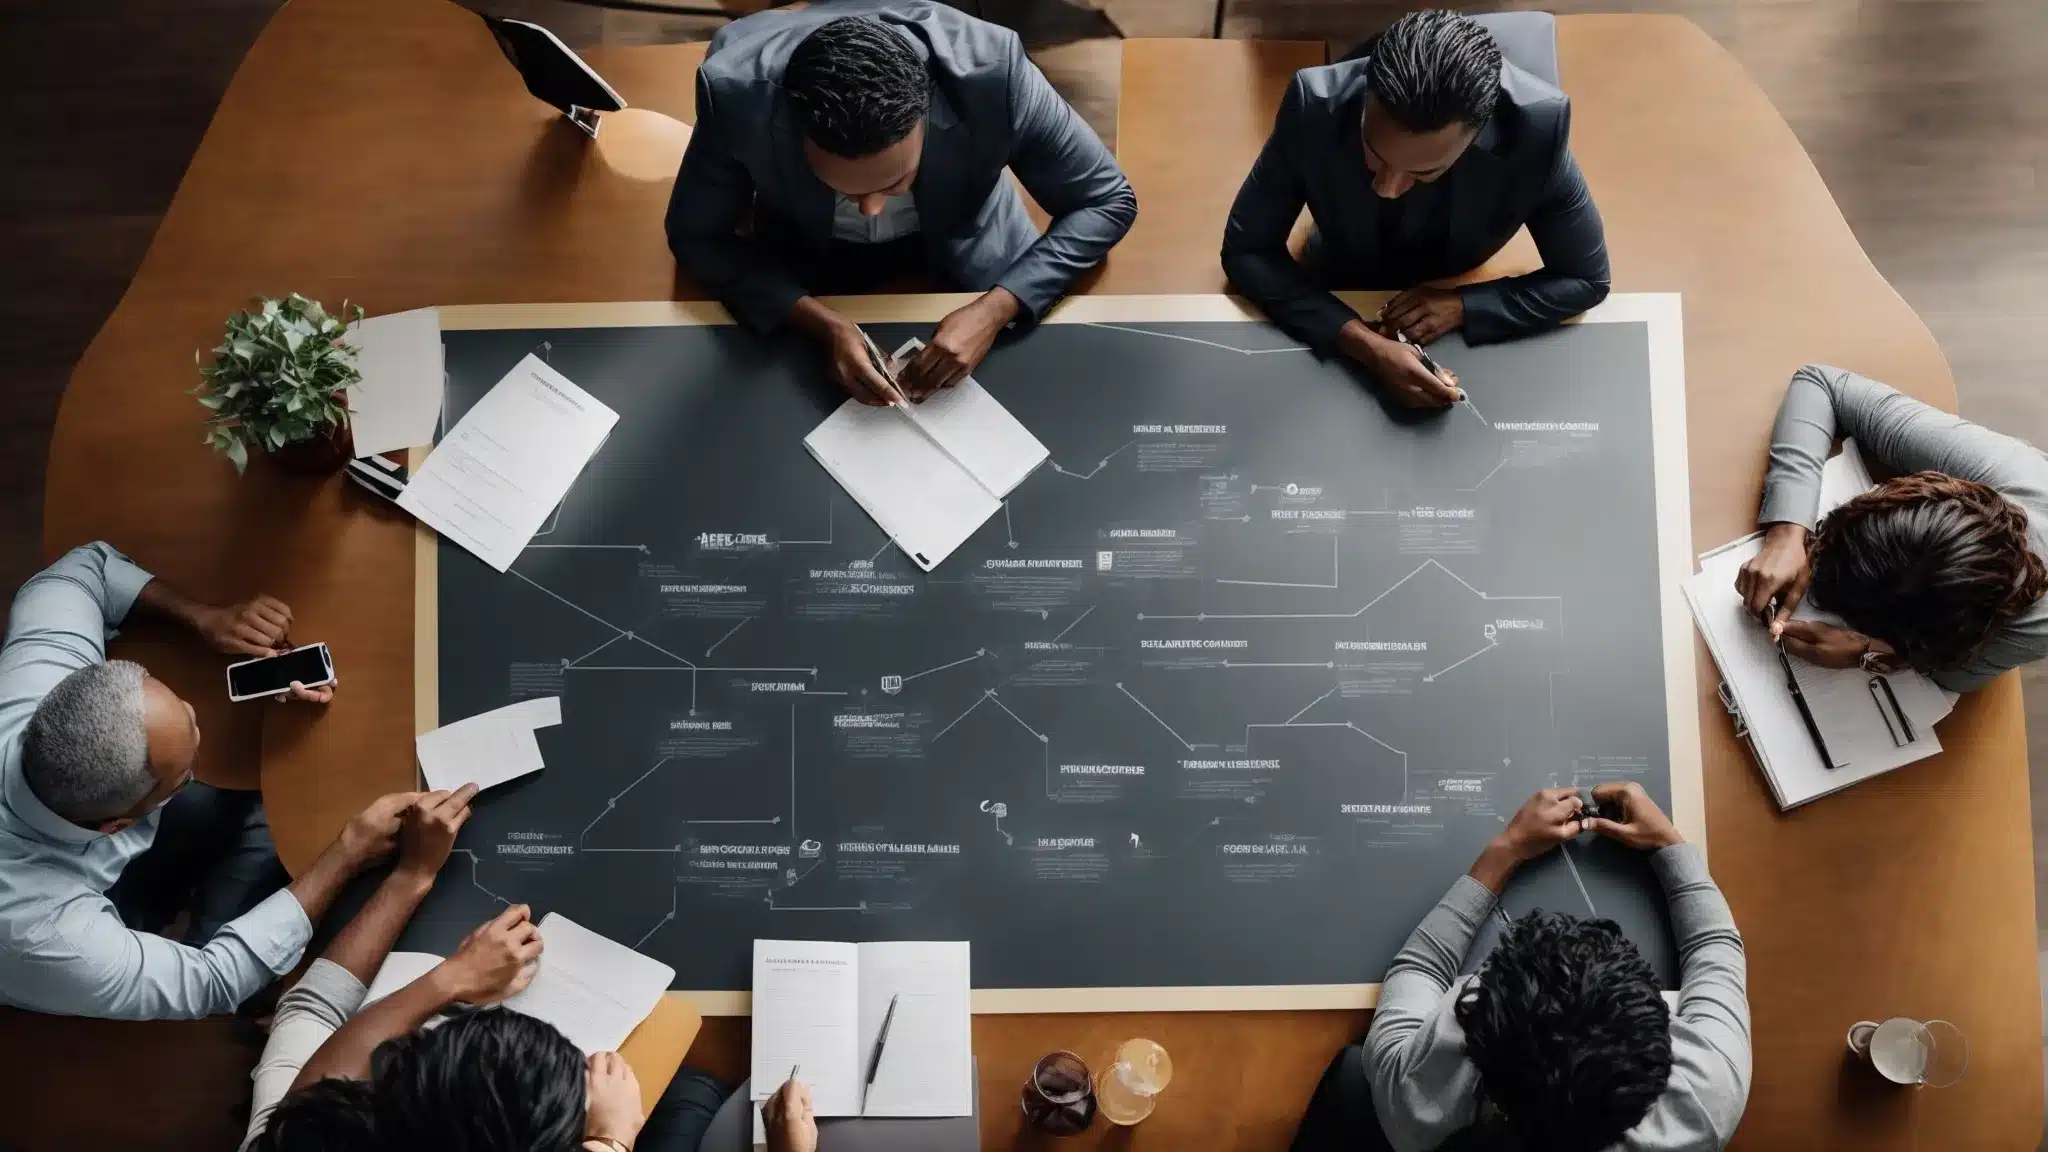 A Dynamic Team Gathers Around A Conference Table, Brainstorming Over A Large Flowchart Depicting Various Interconnected Marketing Channels.